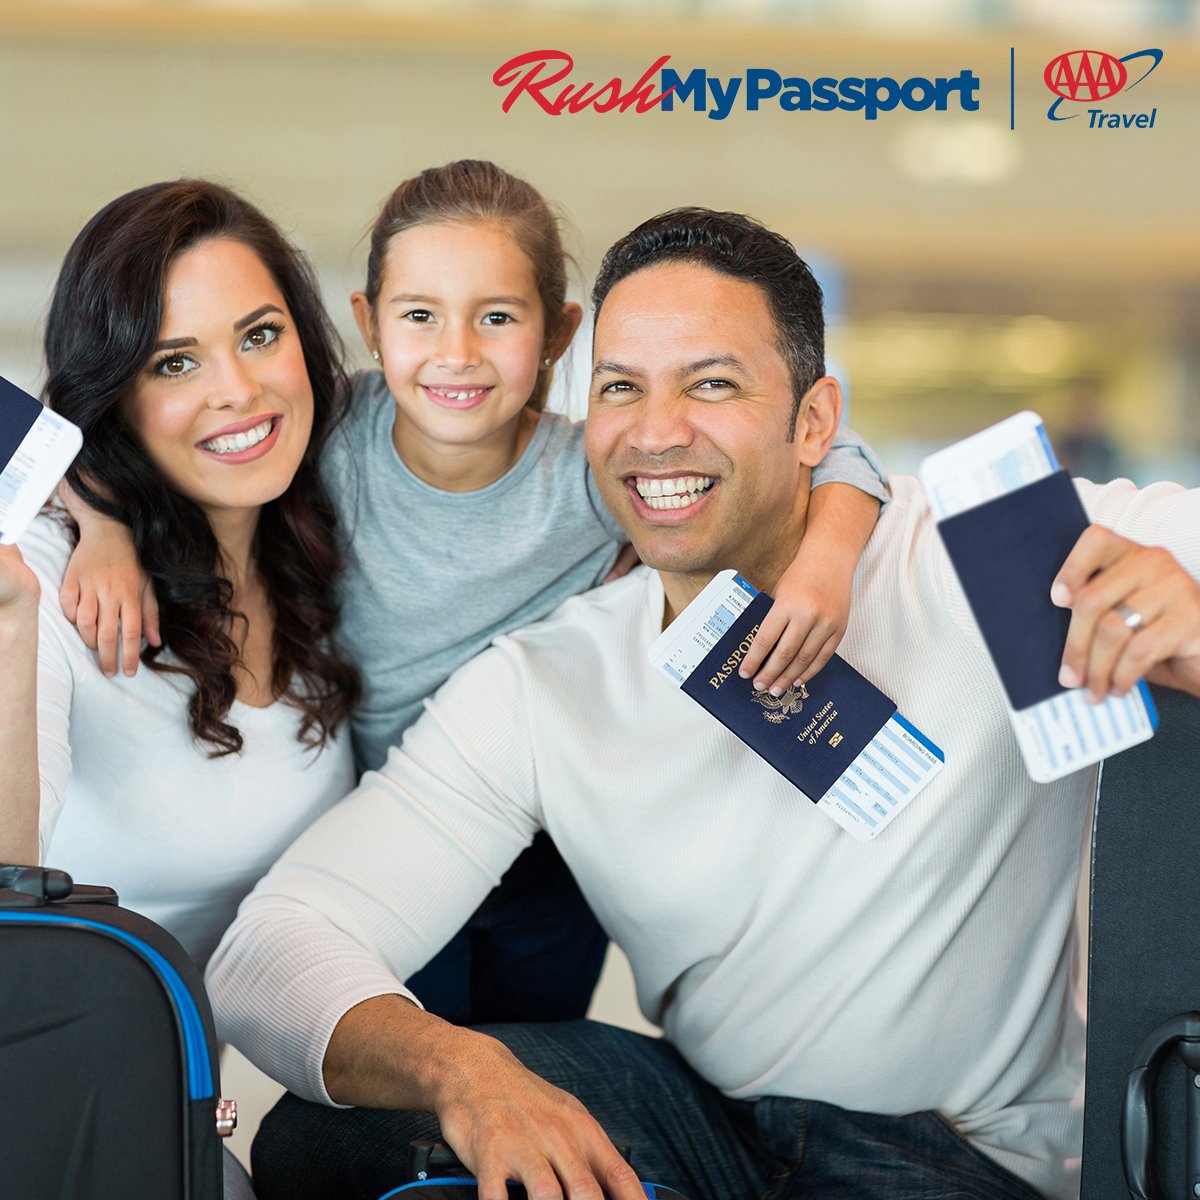 Get your passport quickly with AAA & RushMyPassport AAA Members save 10% on all expedited U.S. Passport & Global Travel Visa services. Simplify your travel documents. ✈️ spr.ly/6018XYDNK